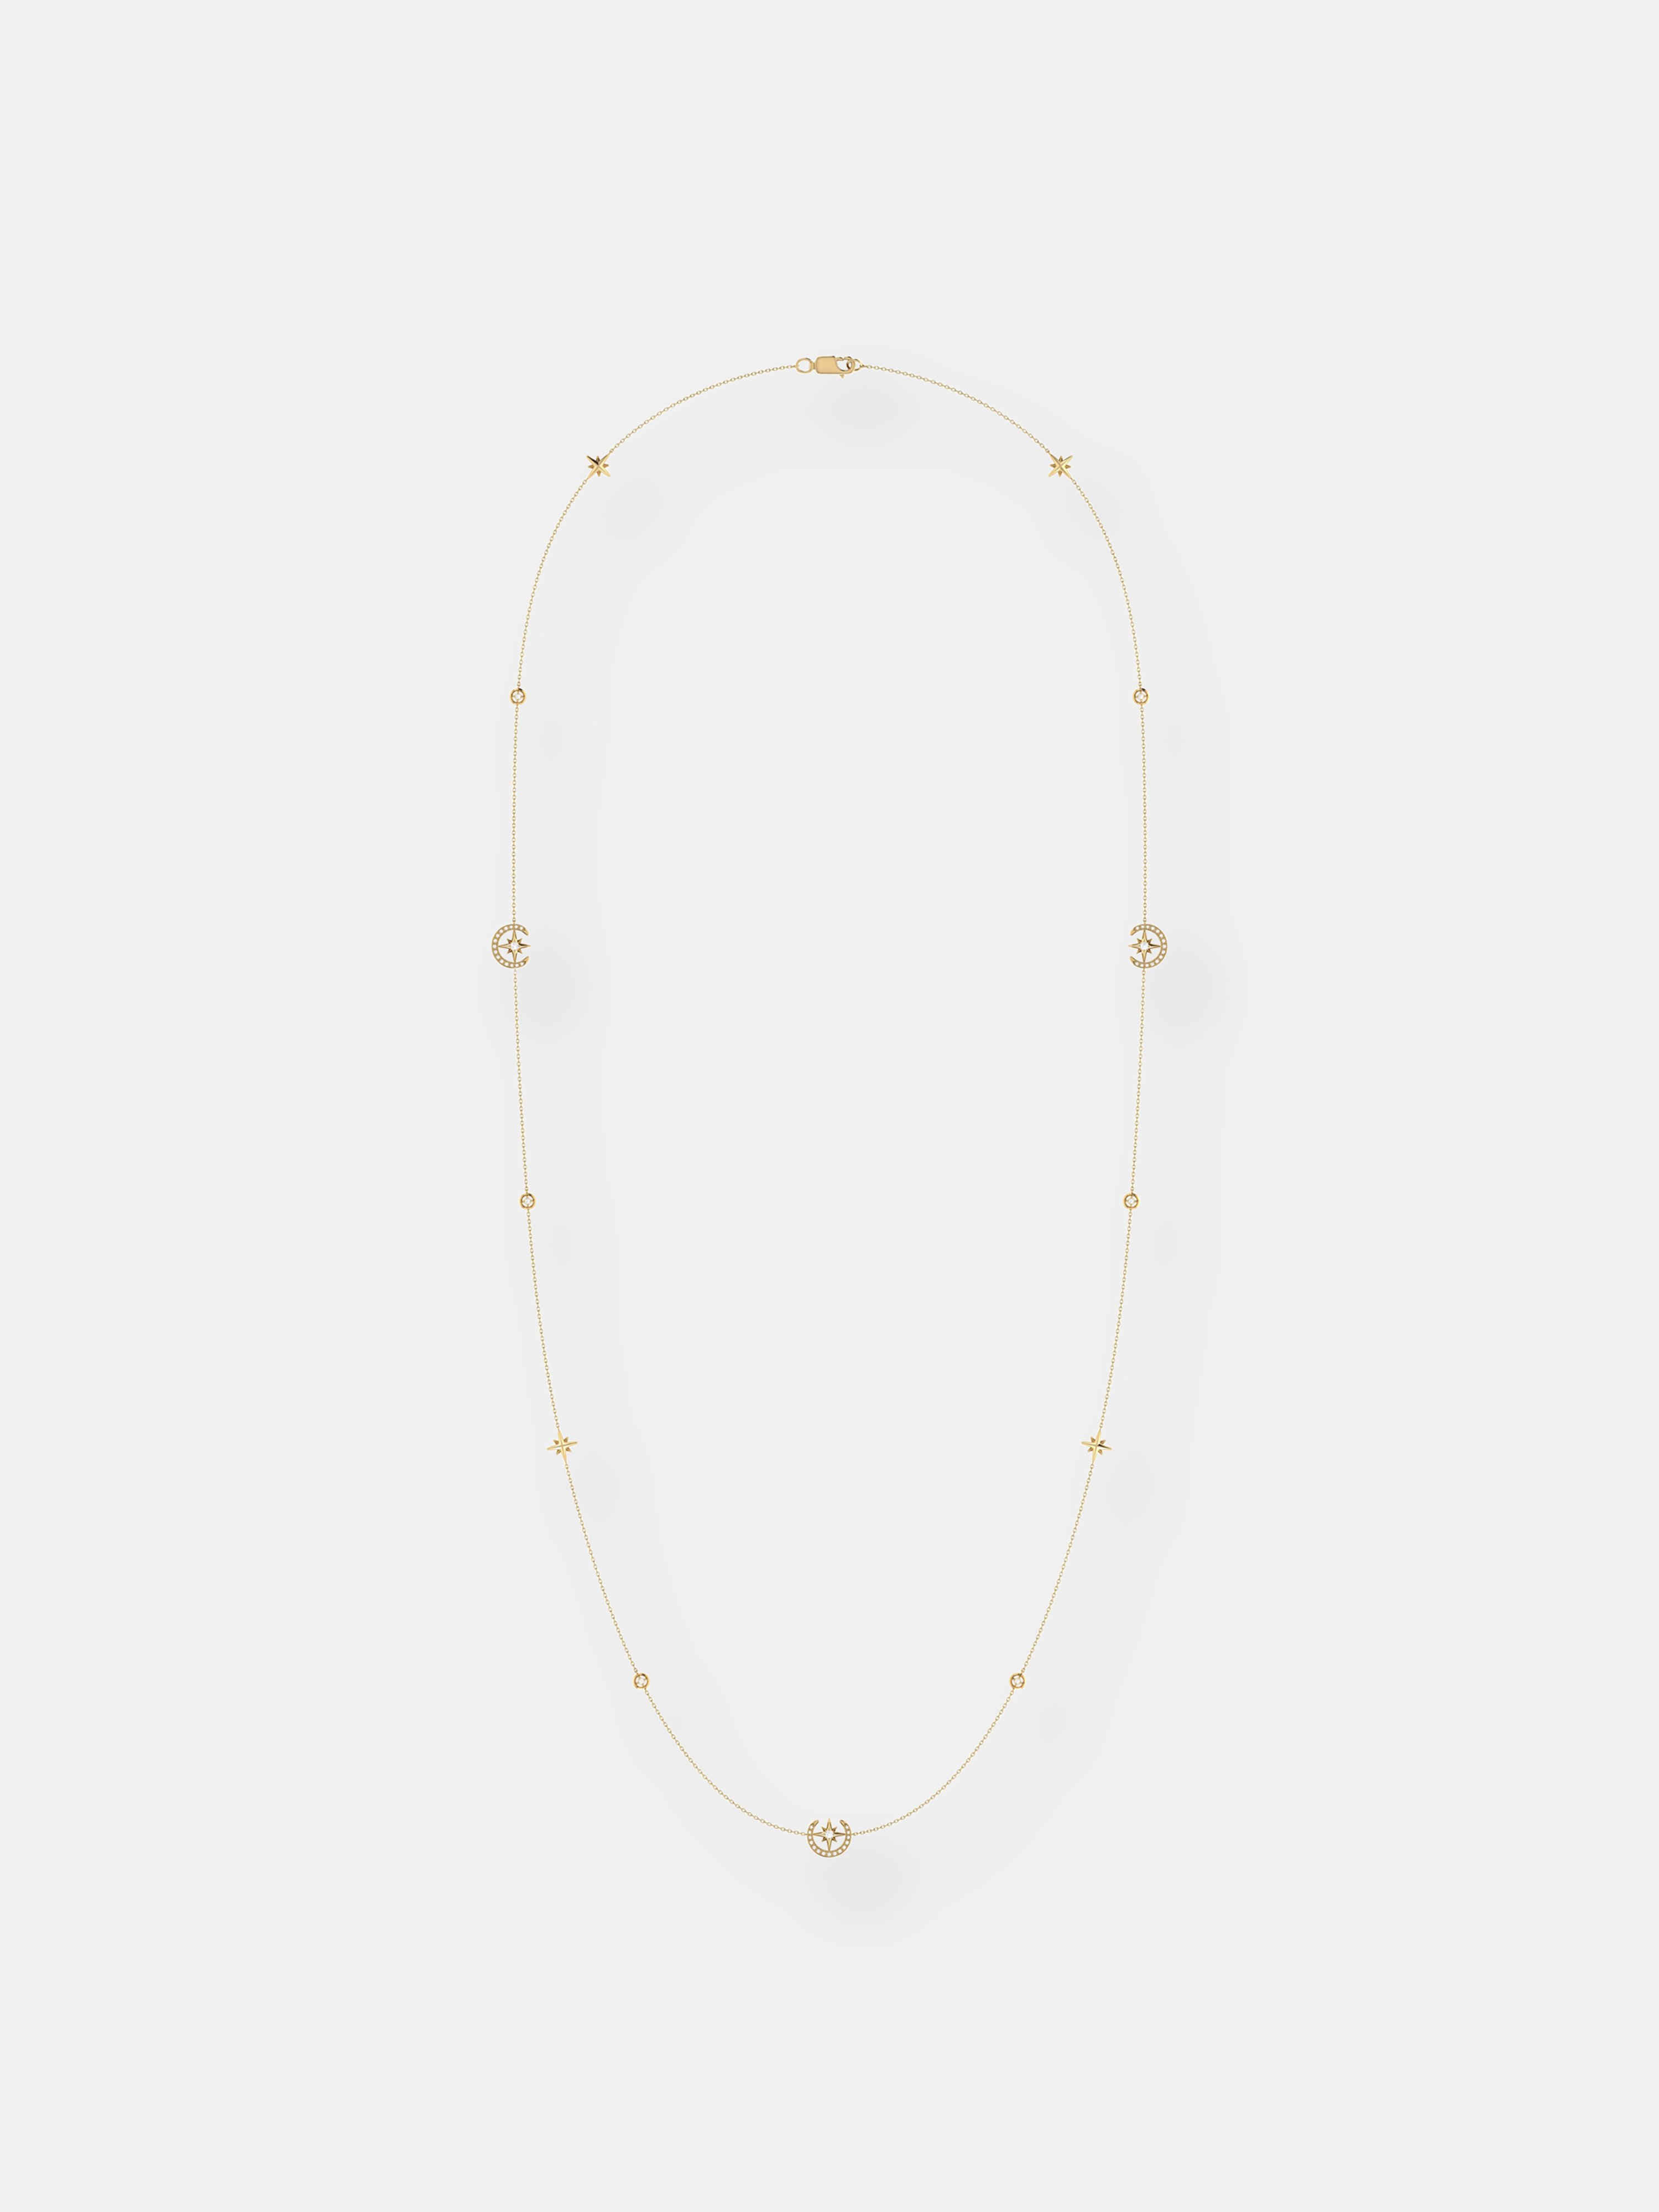 Luvmyjewelry North Star Crescent Layered Diamond Necklace In 14k Yellow Gold Vermeil On Sterling Sil